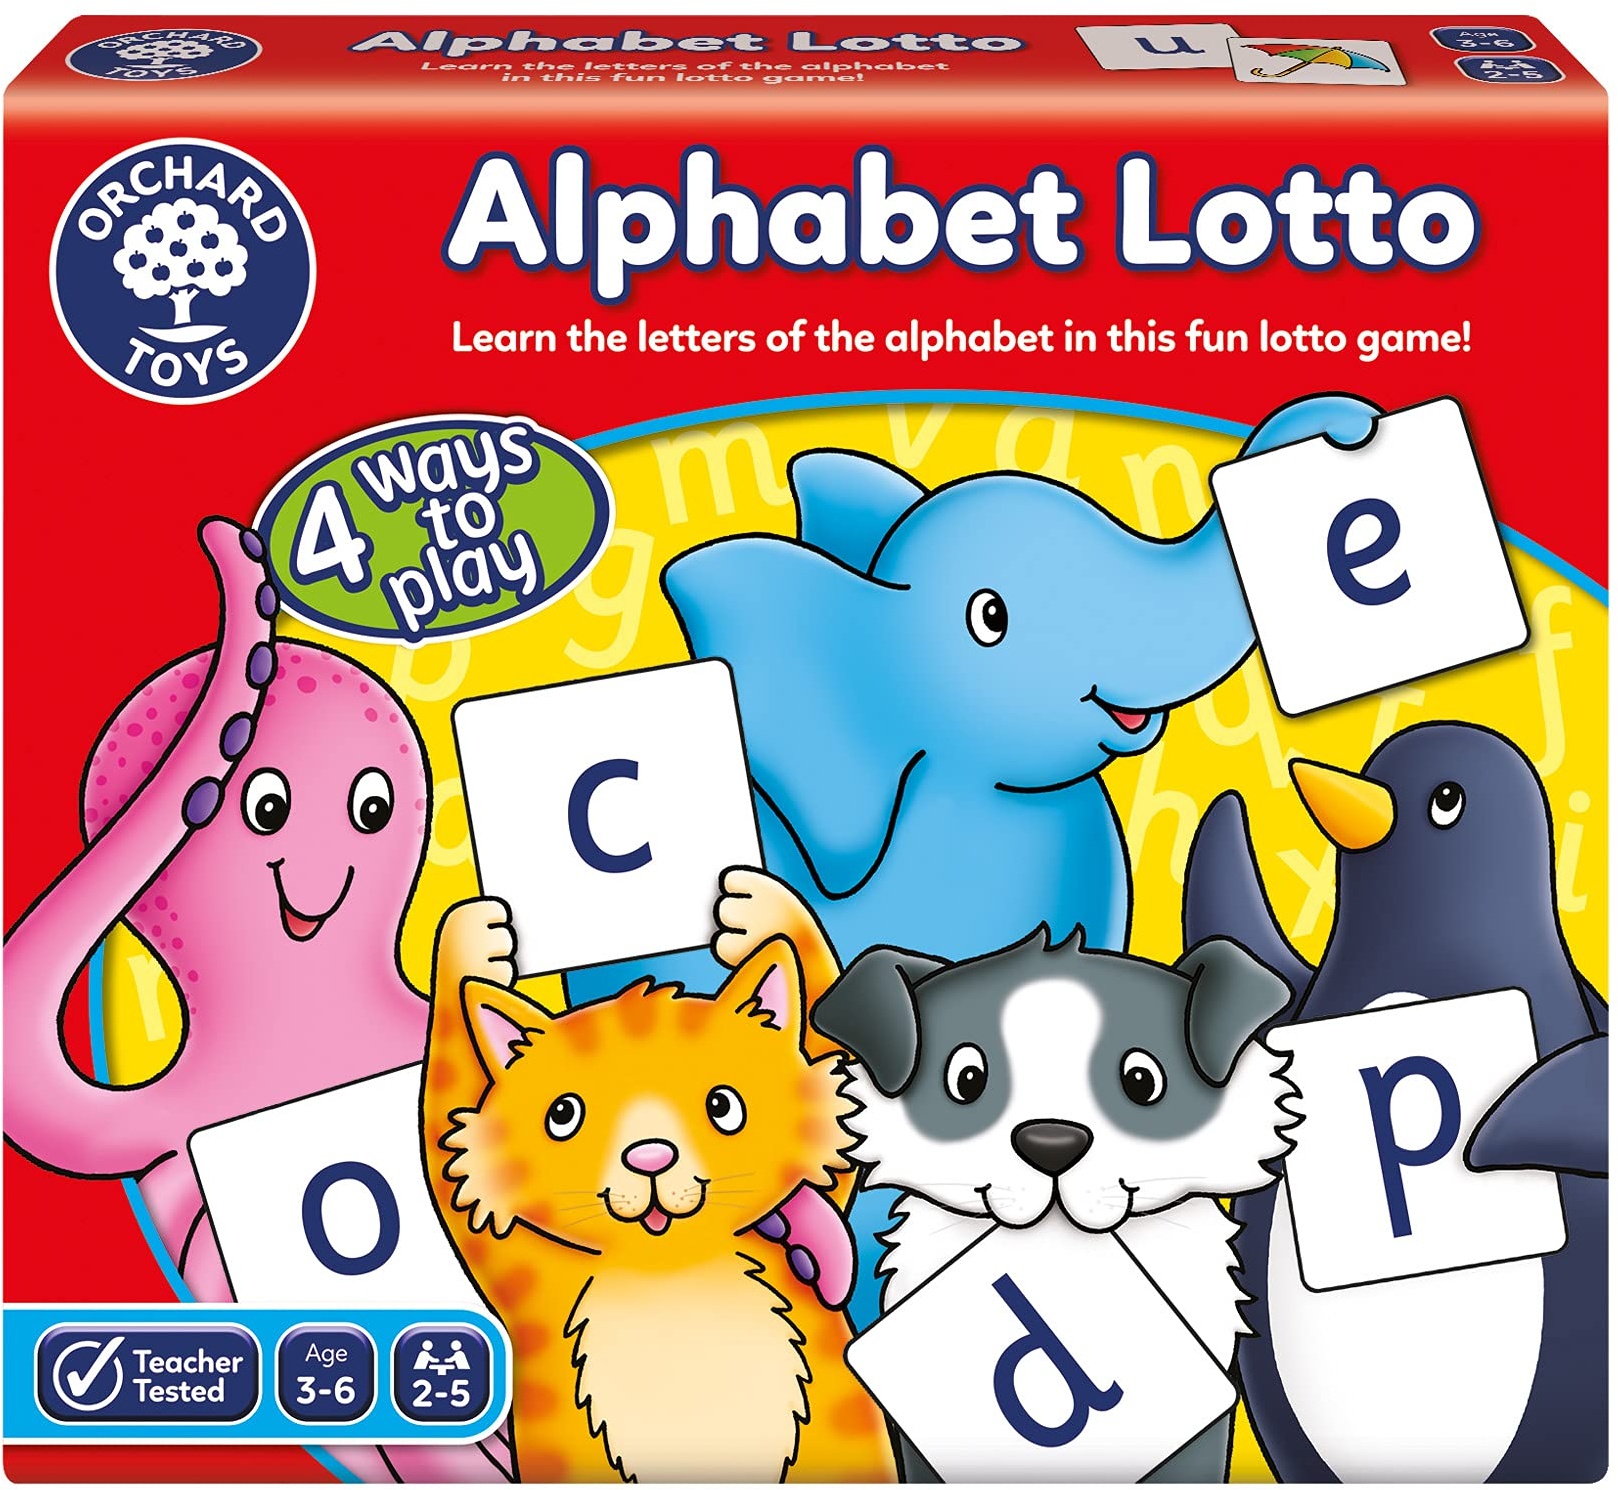 Orchard Toys Alphabet Lotto Game, Learn The Letters of The Alphabet, Fun Memory Game for Children Age 3-6. 4 Ways to Play! Educational Toy